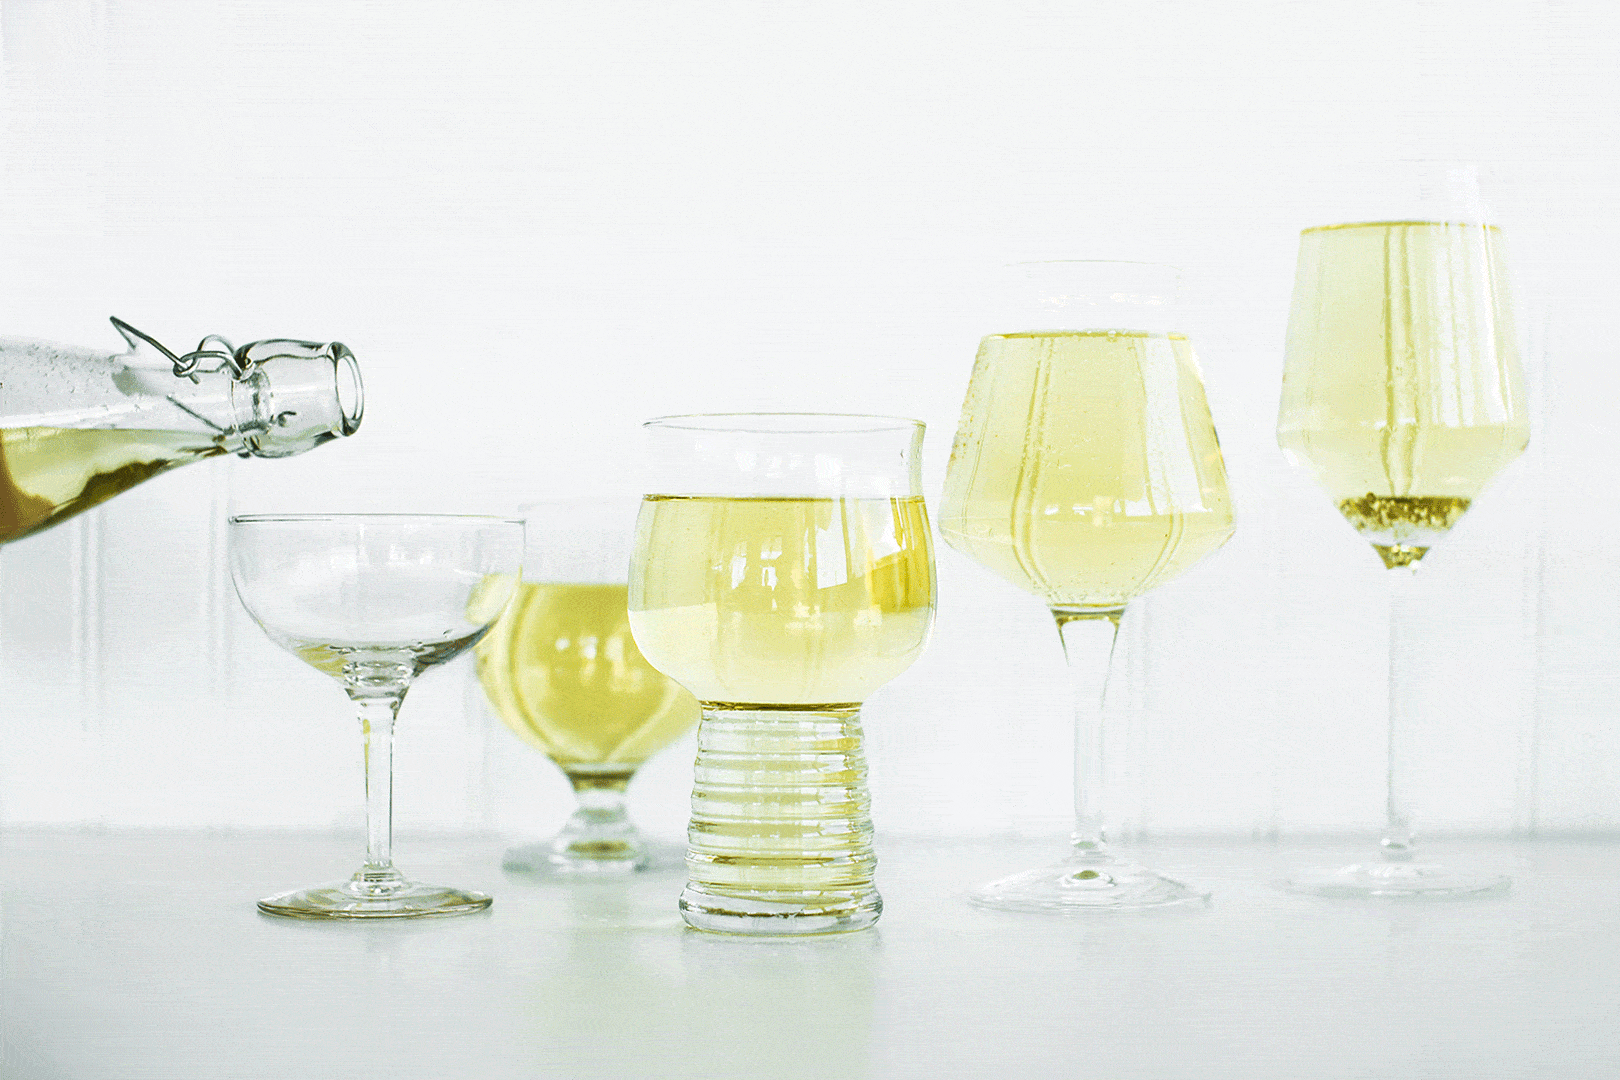 Glass system: what I drink cider from, when and why